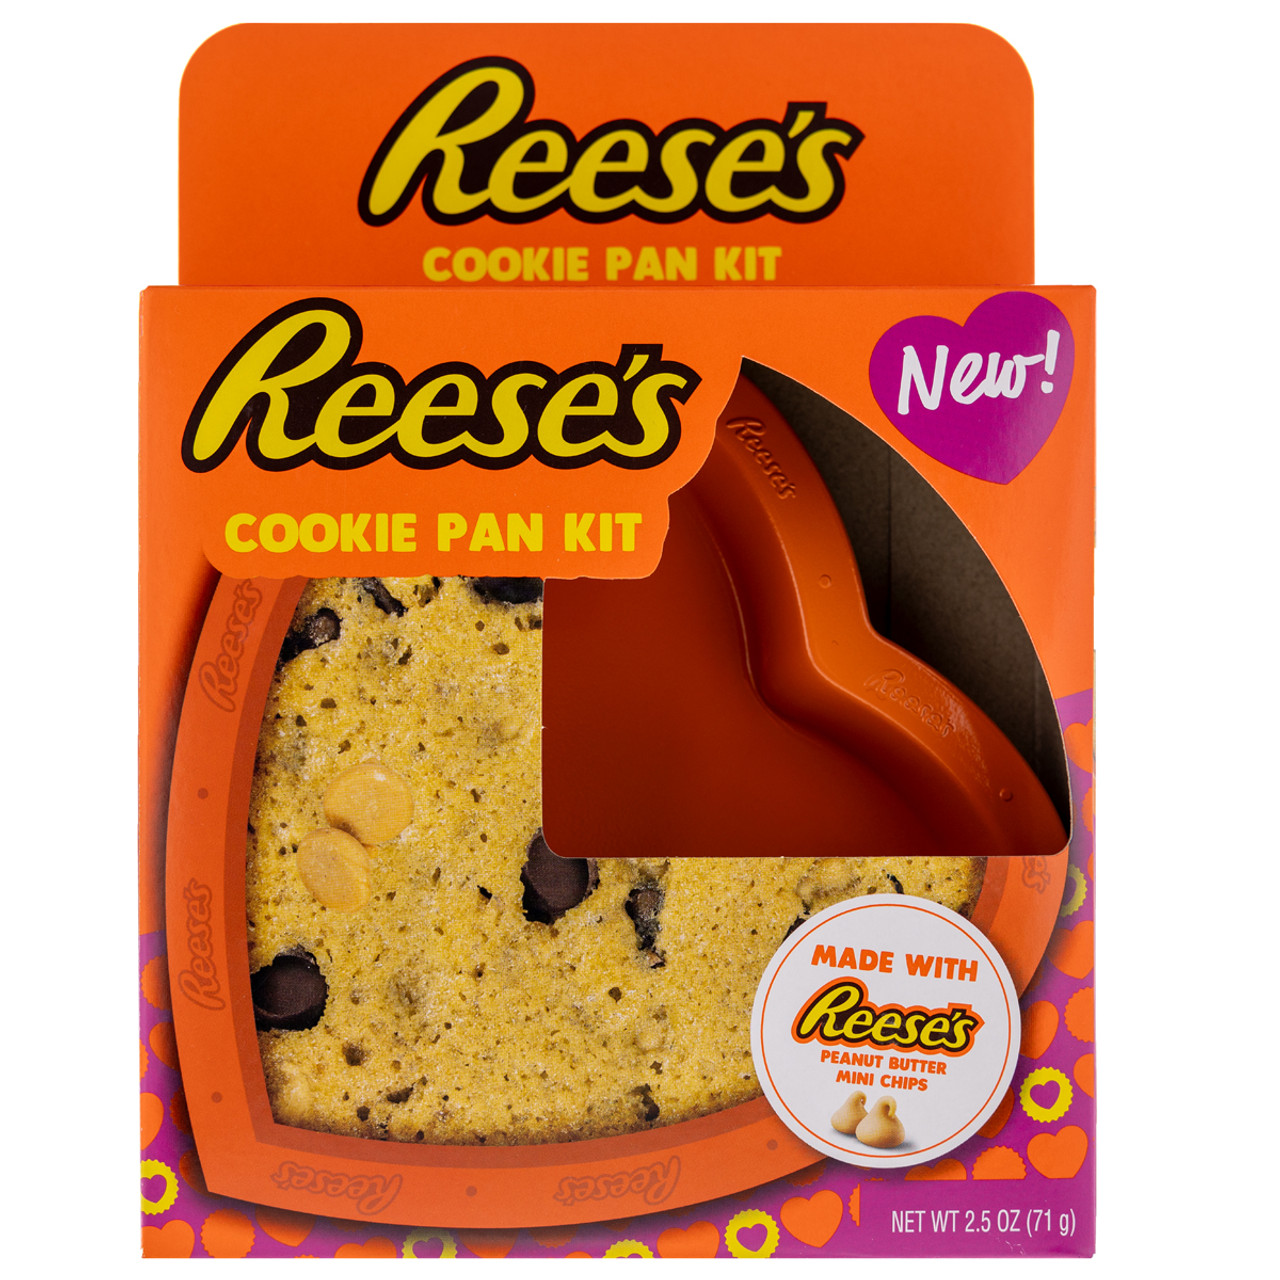 https://cdn11.bigcommerce.com/s-s400f38mcs/images/stencil/1280x1280/products/1283/5576/240606191_REESES_5INCH_HEART_PAN_FRONT__78154.1703775446.jpg?c=1